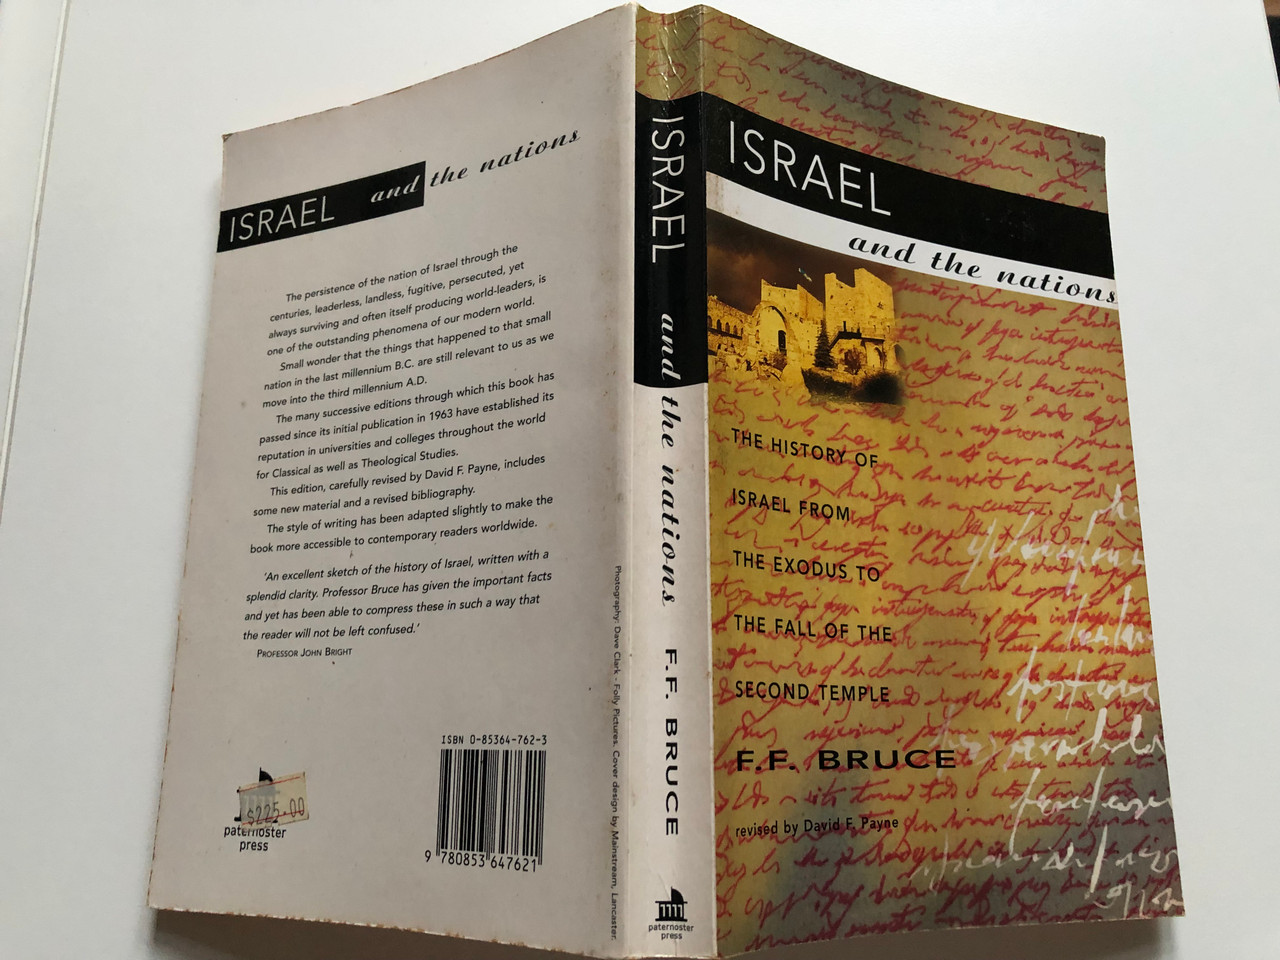 https://cdn10.bigcommerce.com/s-62bdpkt7pb/products/51773/images/263332/1_Israel_and_the_Nations_The_History_of_Israel_from_the_Exodus_to_the_Fall_of_the_Second_Temple_Author_F._F._Bruce_9780853647621_10__49440.1673083447.1280.1280.JPG?c=2&_gl=1*11z22fd*_ga*MjAyOTE0ODY1OS4xNTkyNDY2ODc5*_ga_WS2VZYPC6G*MTY3MzA2NzgxNS4yNjA0LjEuMTY3MzA4MzQzNy42MC4wLjA.